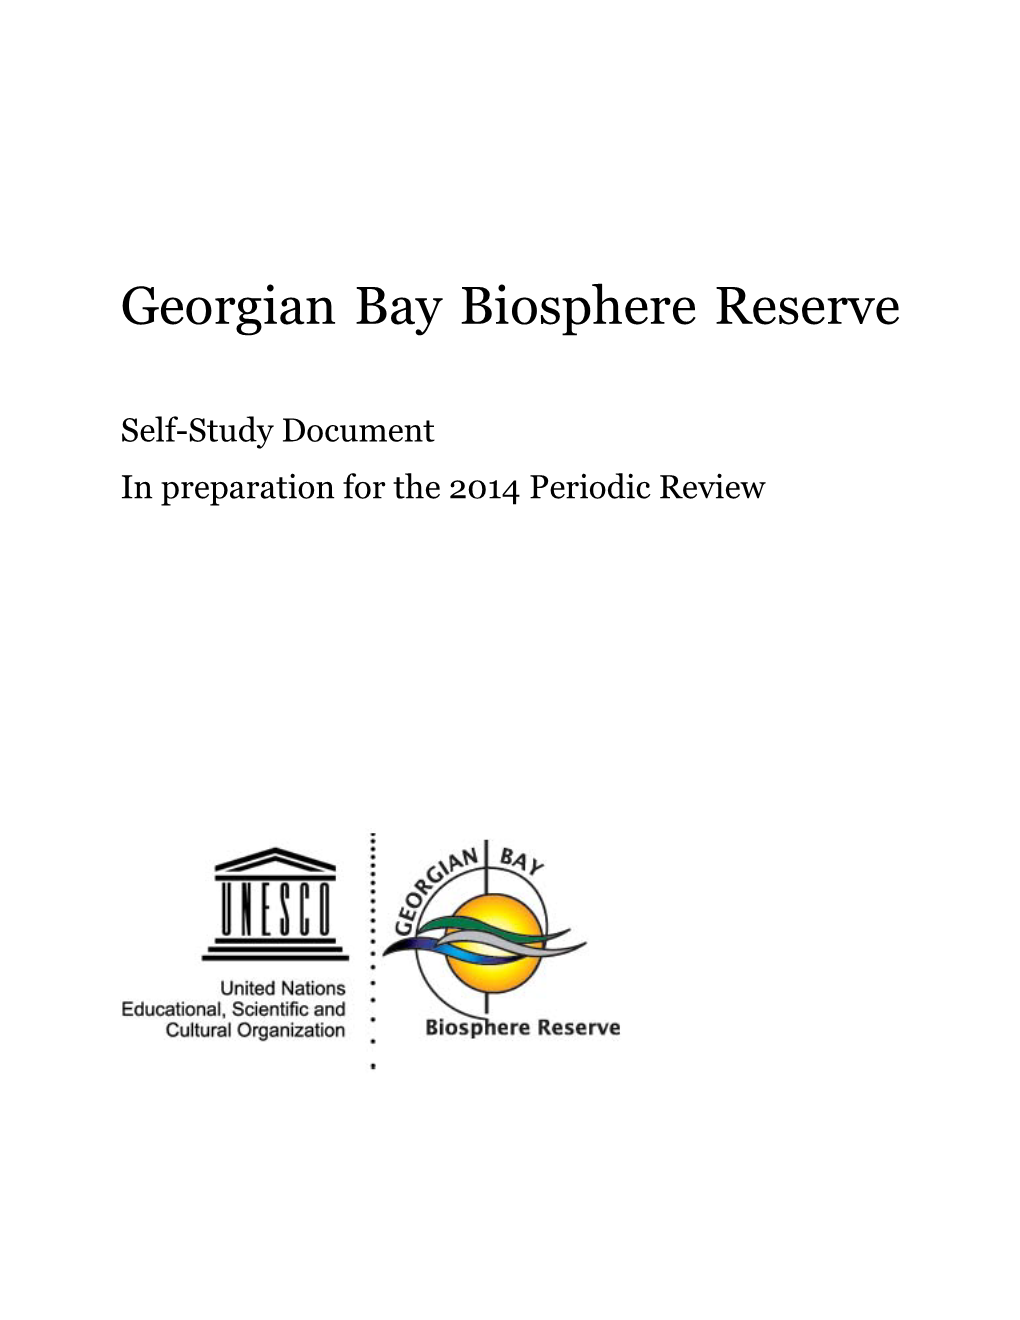 Self-Study Document in Preparation for the 2014 Periodic Review